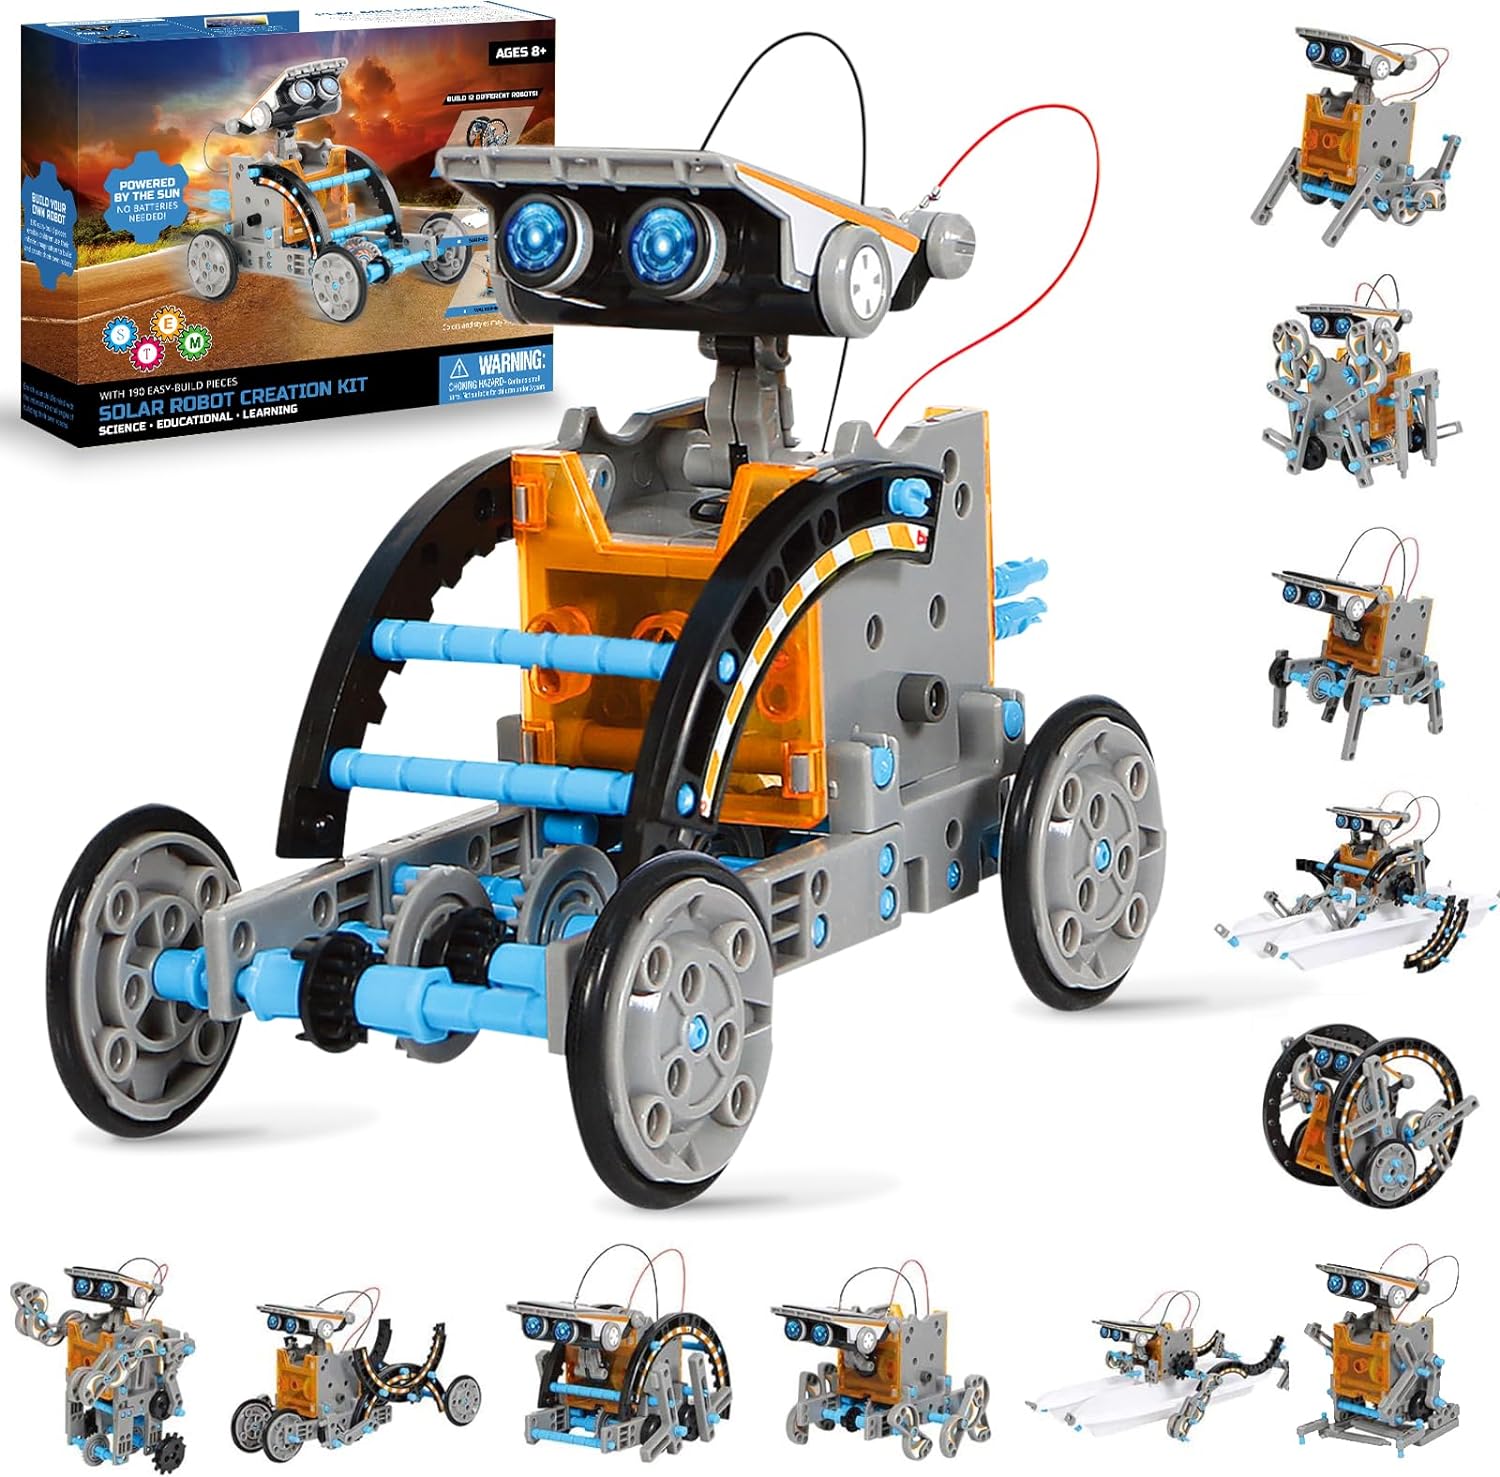 I purchased this toy for my 7-year-old grandson. It was a ittle more complicated than I thought. Should have stuck with the recommended age of 8 - 12. Luckily, my 33-year-old son, his Uncle, is very intuitive and patient and helped him build some of the bots. Bots are real fun once put together. Definitely teaches dexterity and understanding directions.